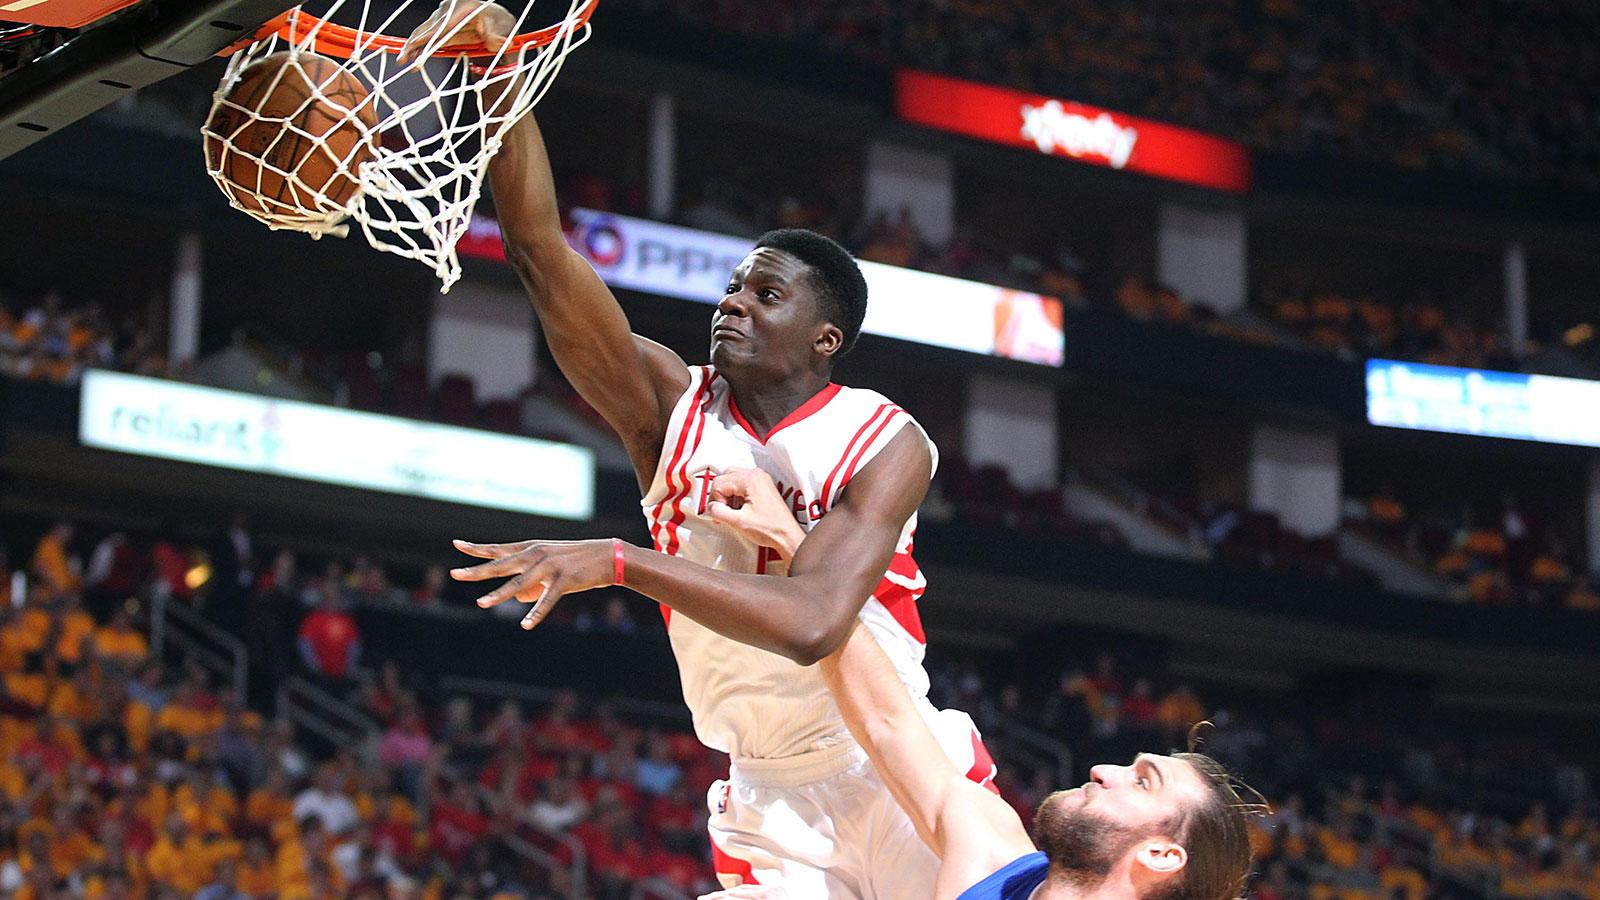 Watch Clint Capela dunk on Spencer Hawes' head